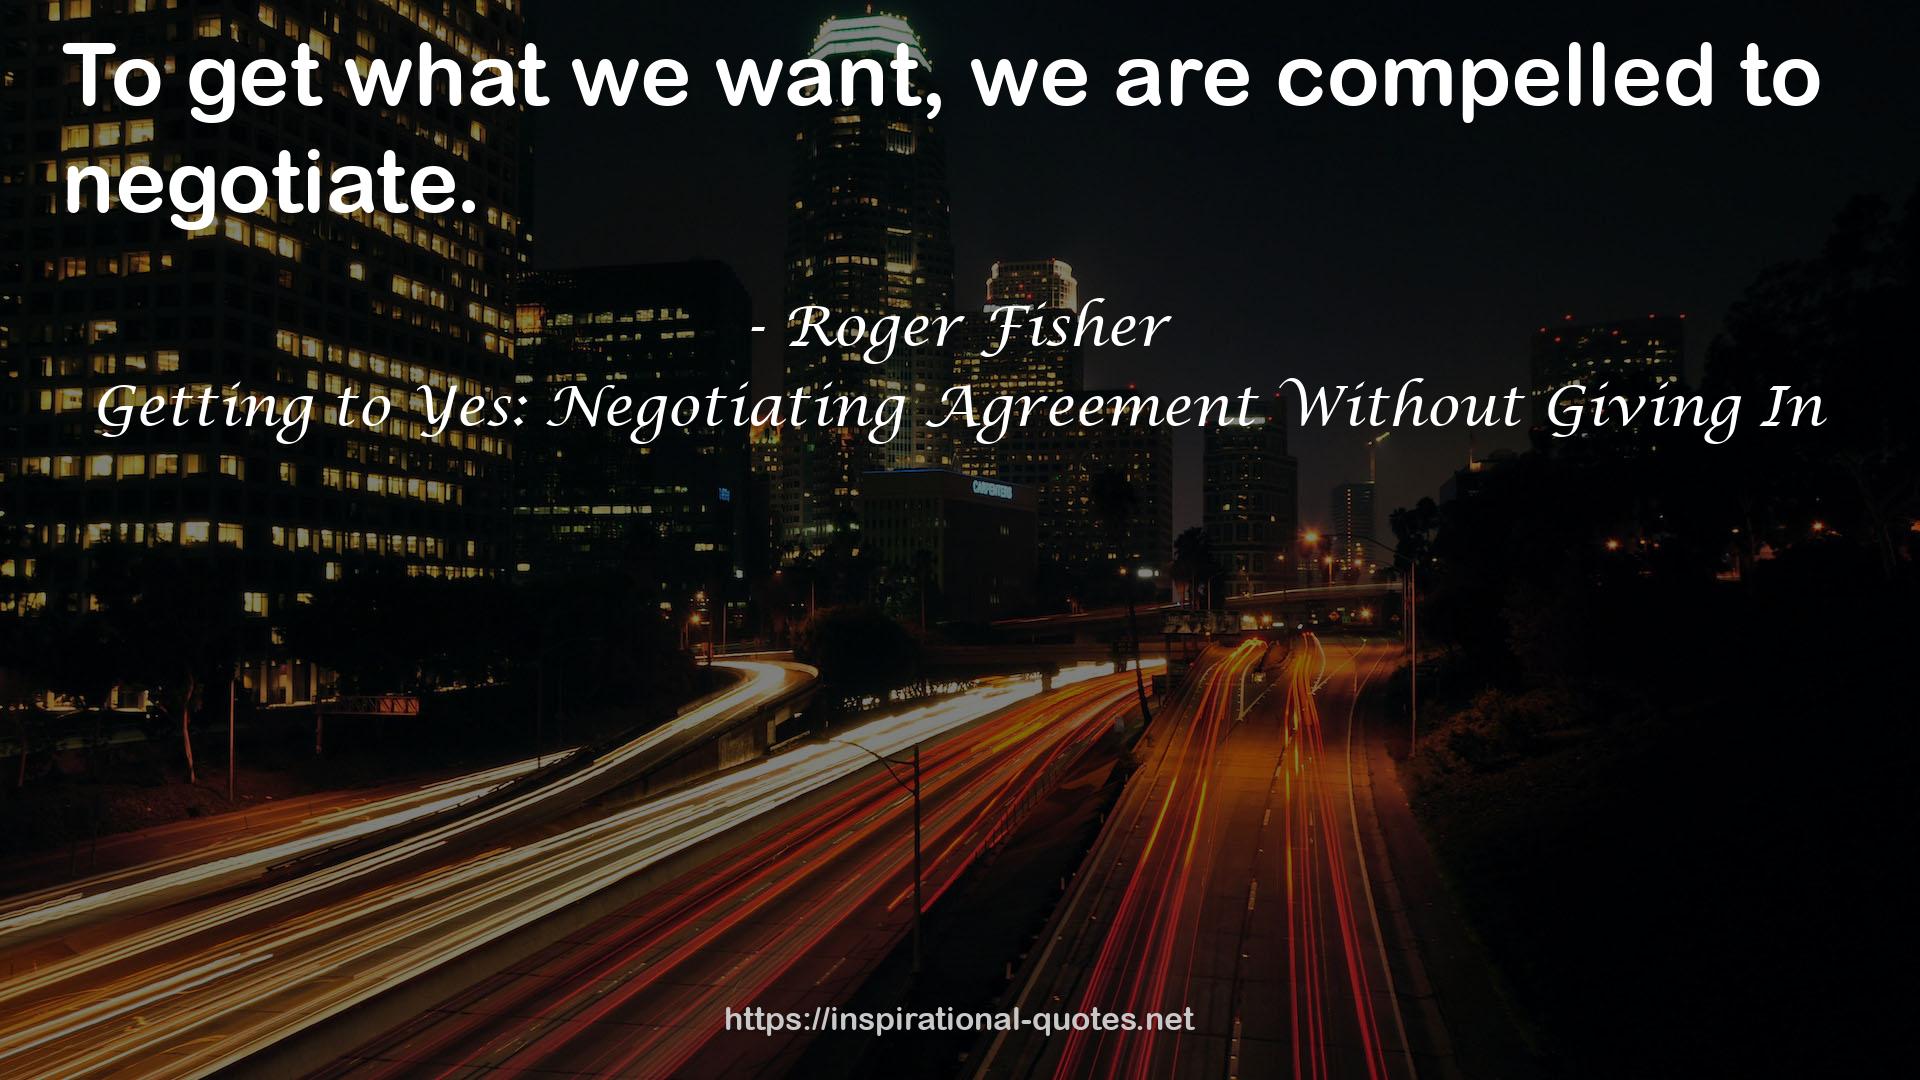 Getting to Yes: Negotiating Agreement Without Giving In QUOTES